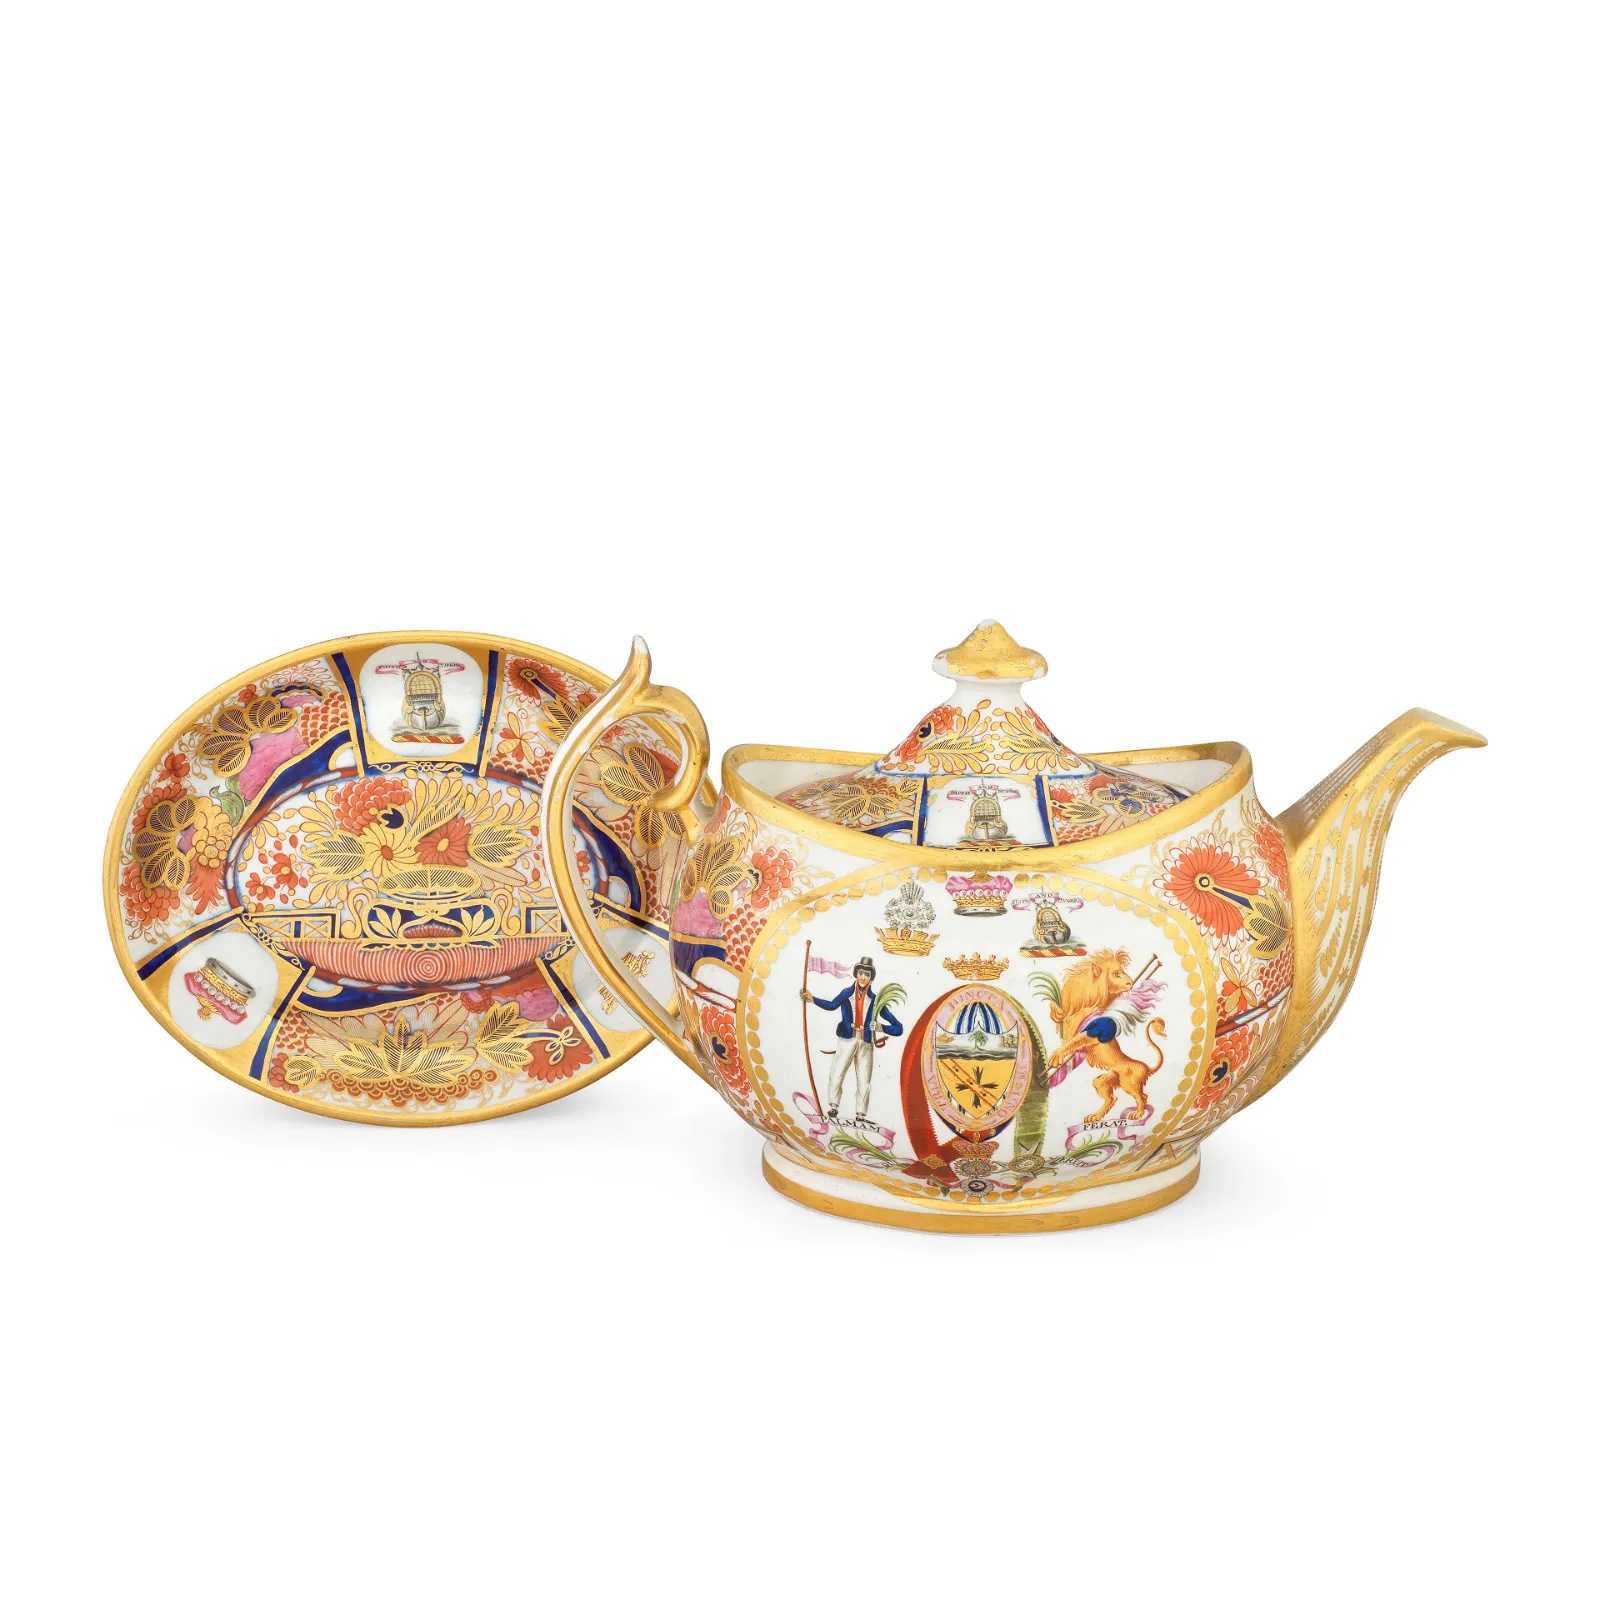 A Chamberlain Worcester teapot, cover, and stand from the Horatia Service, estimated at £25,000-£35,000 ($31,410-$43,970) at Bonhams.